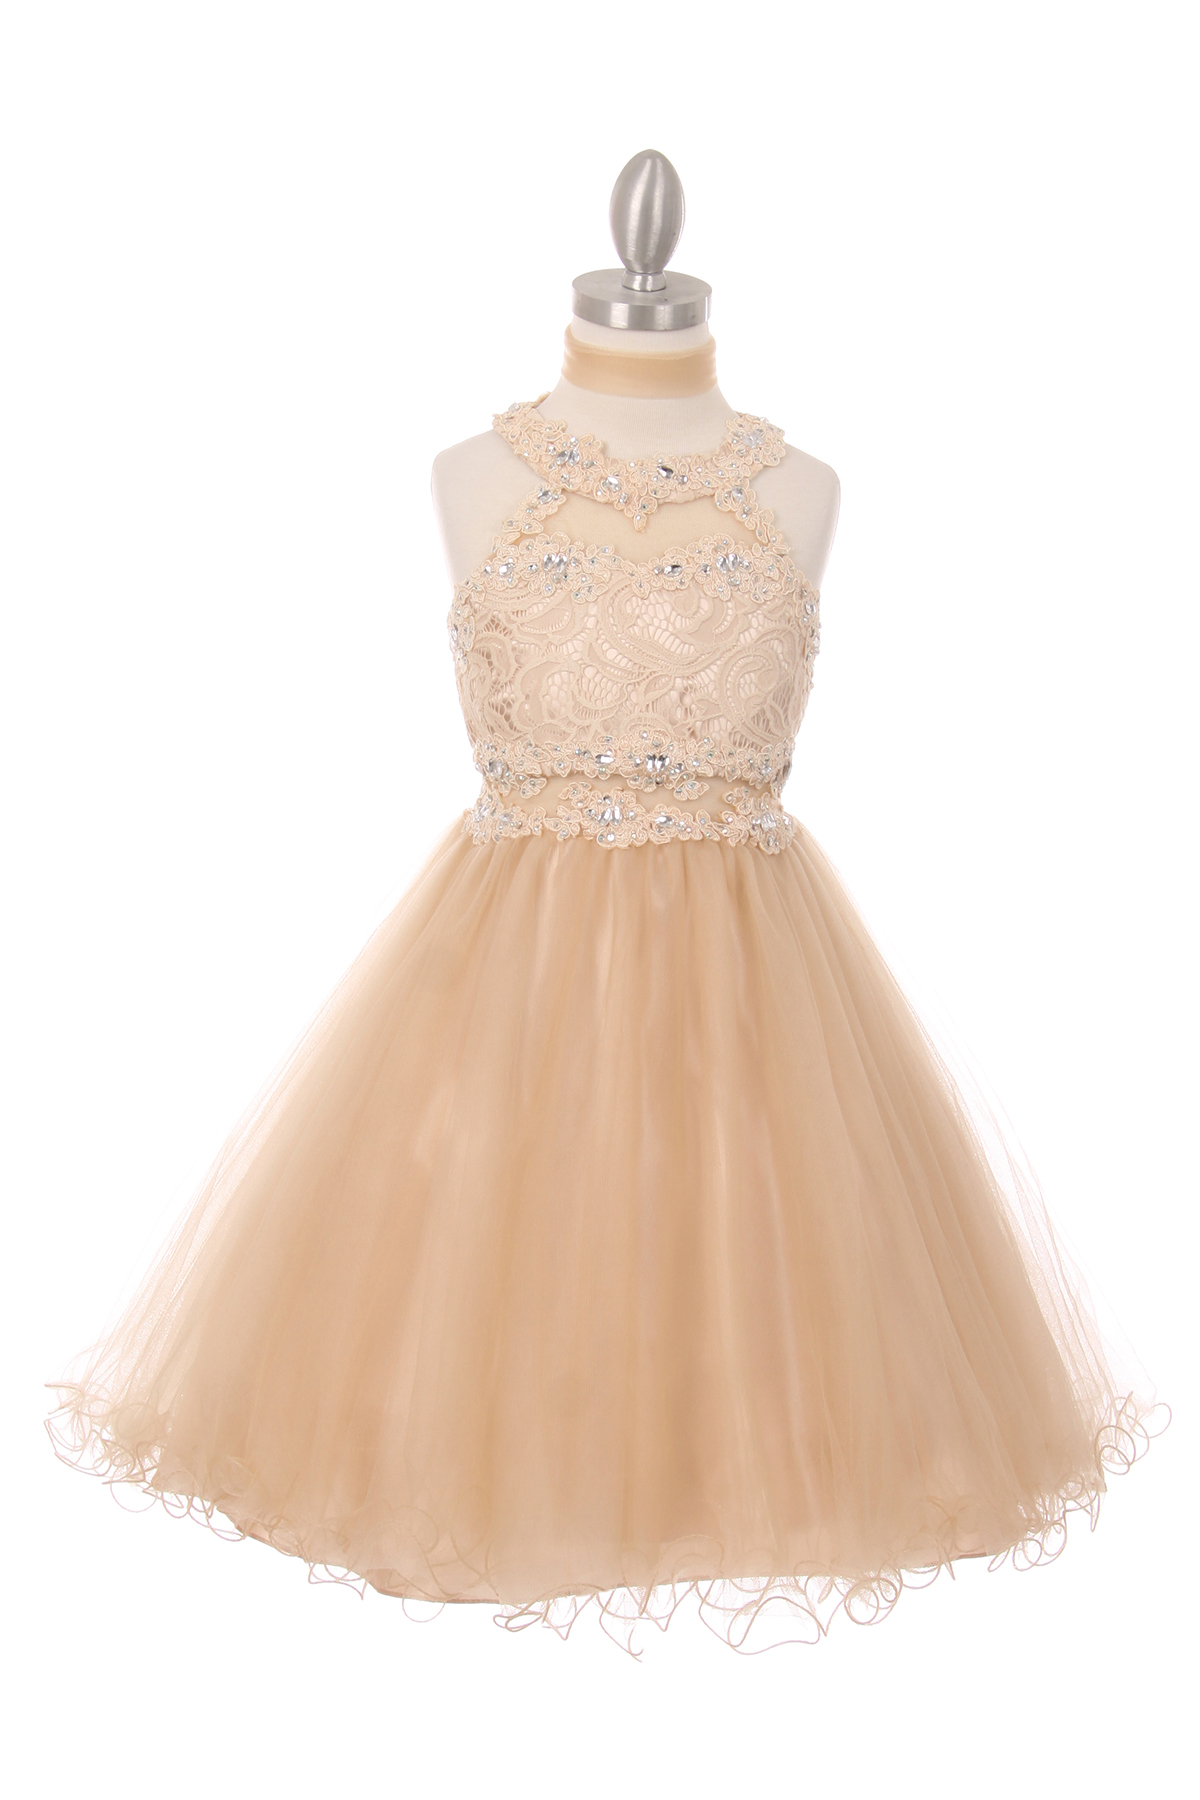 champagne short ruffled halter dress with sheer lace bodice